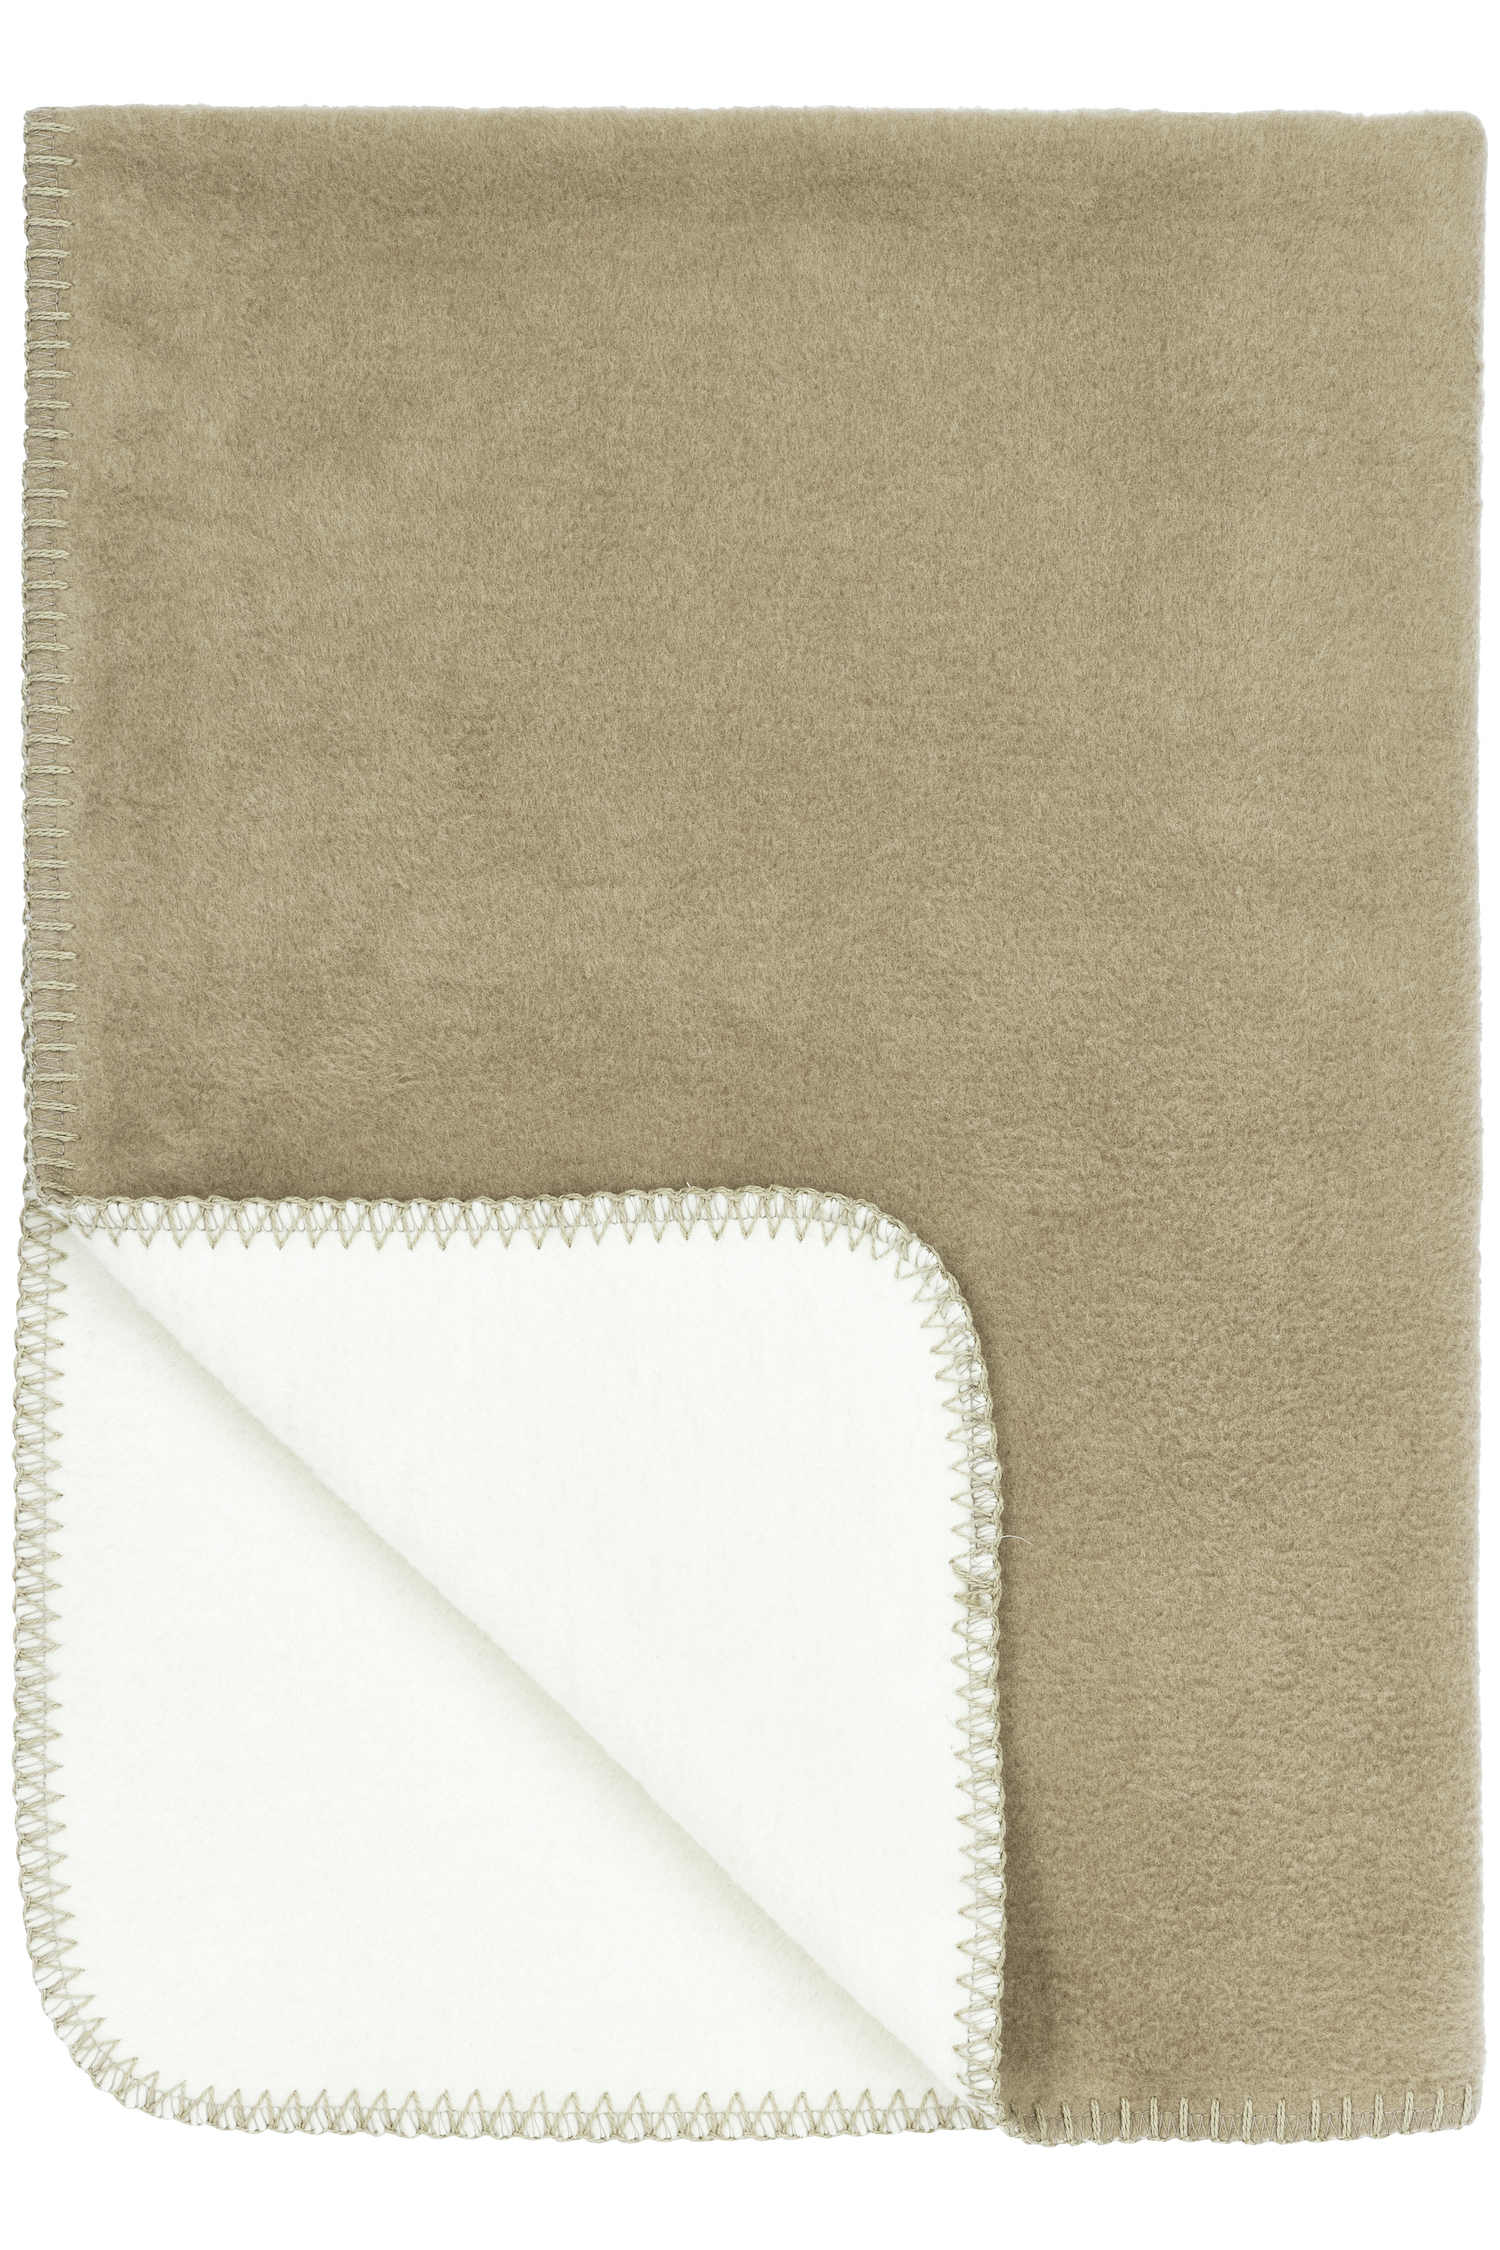 Cot Bed Blanket Double Face - Taupe/Offwhite - 100x150cm